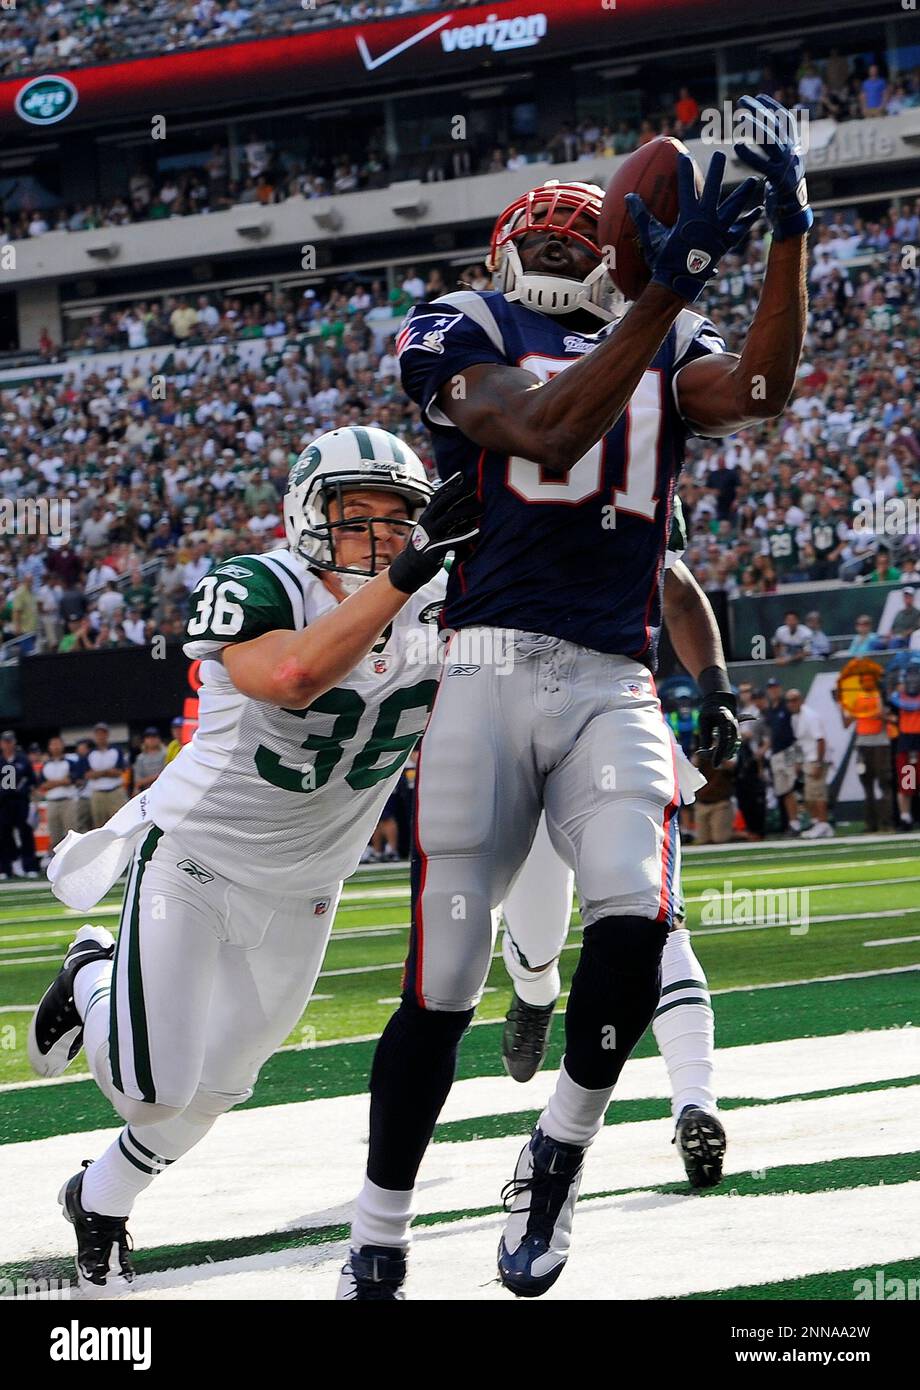 19 September 2010: New England Patriots wide receiver Randy Moss (81)  attempts a catch as New York Jets safety Jim Leonhard (36) defends during  the Jets 28-14 win over the Patriots at